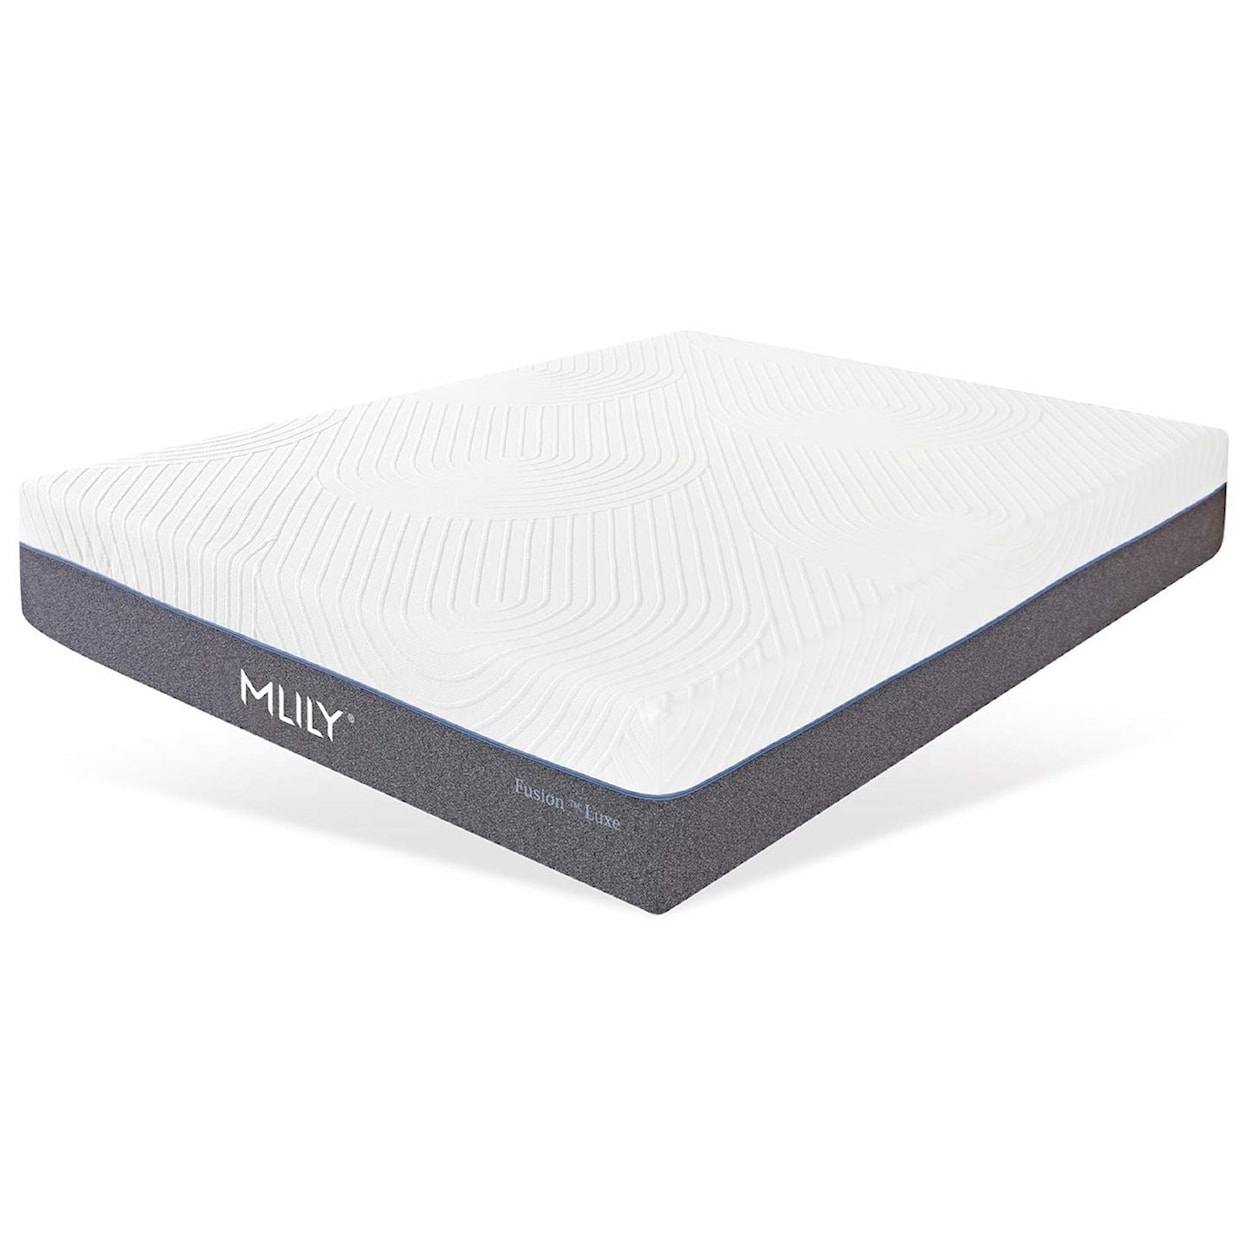 MLILY Fusion Luxe Cal King Hybrid Mattress